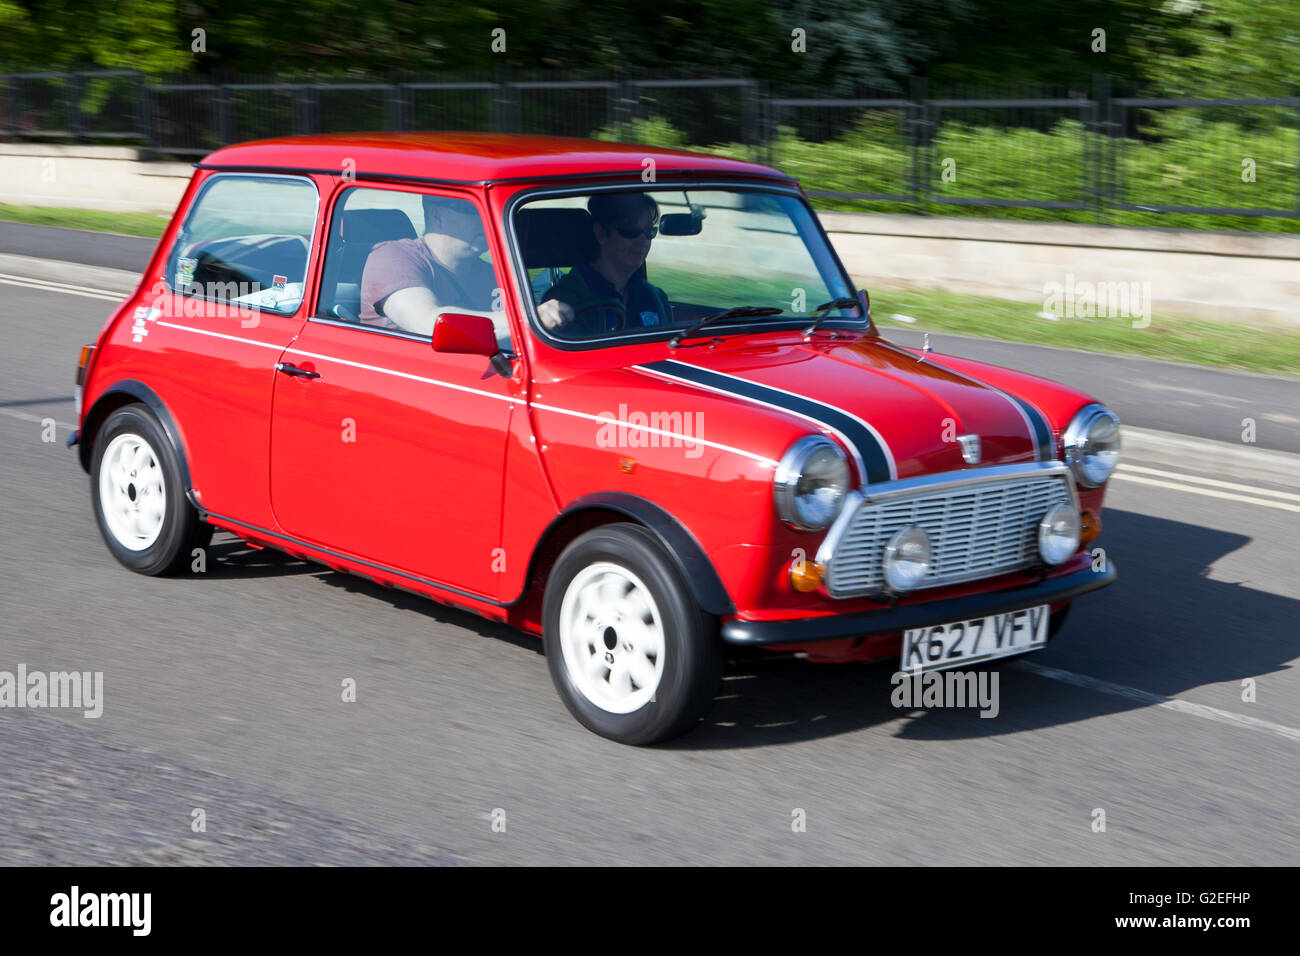 Mini cooper gt, classic sports car, in Pendle, Lancashire, UK. 29th May, 2016. The engines roared throughout the rolling Pennine hills today as supercars from classic to modern day arrived for the PowerFest Charity meet in Pendle. Credit:  Cernan Elias/Alamy Live News Stock Photo